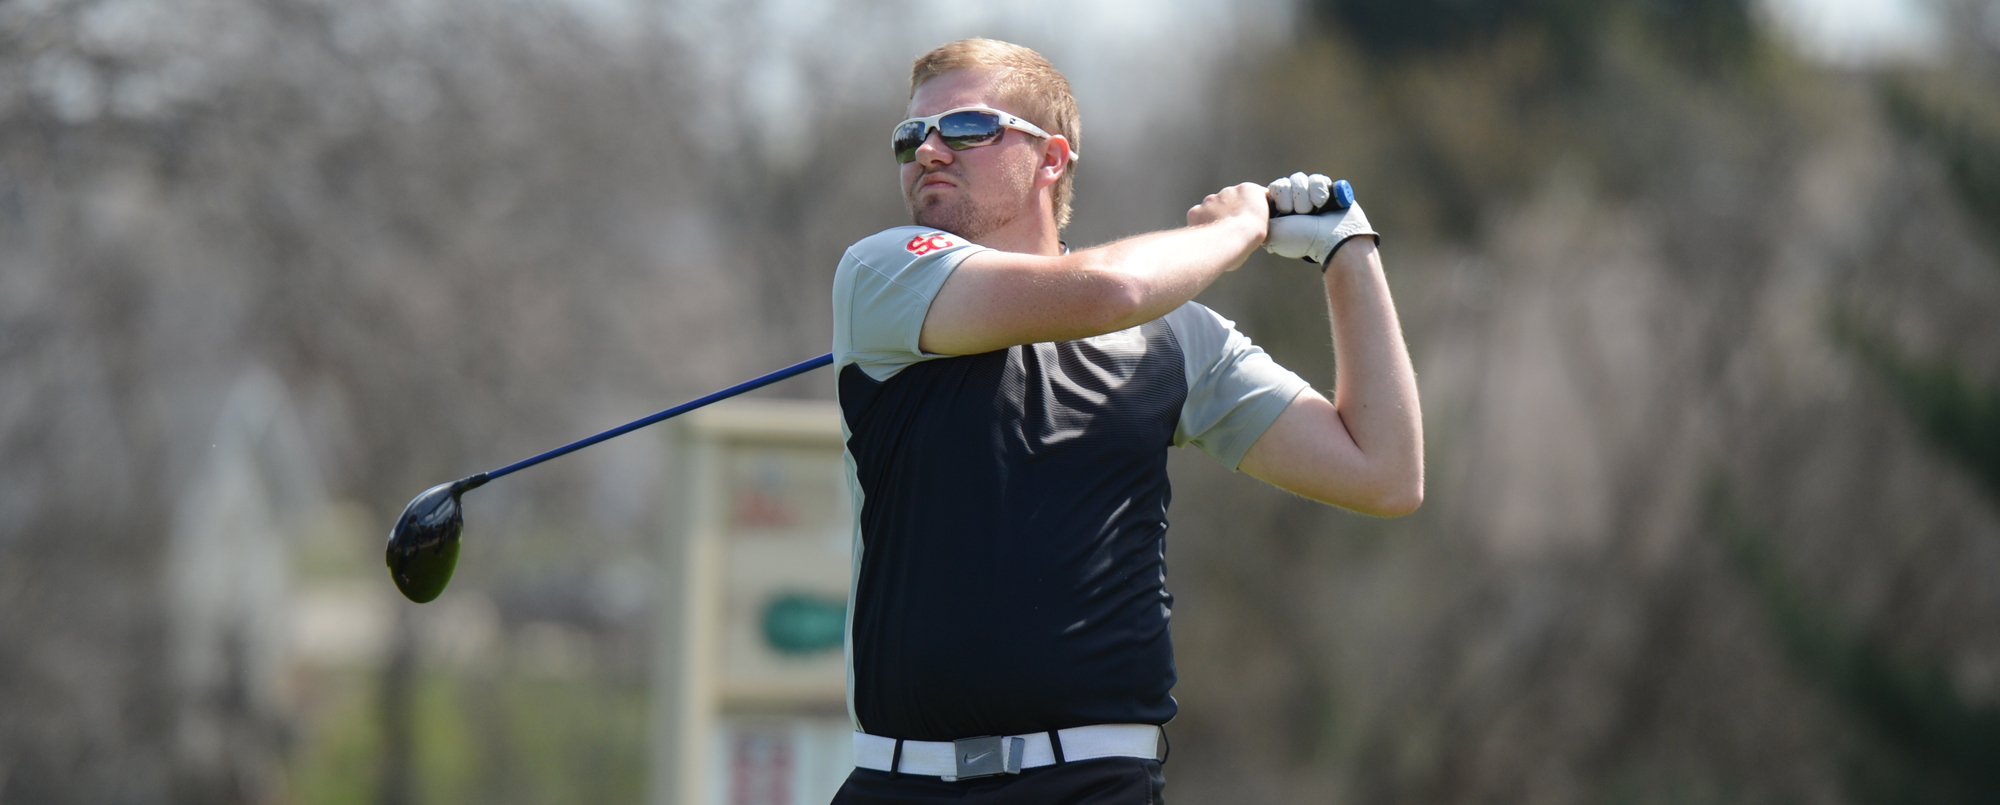 Storm in seventh after first day of Simpson Spring Invitational